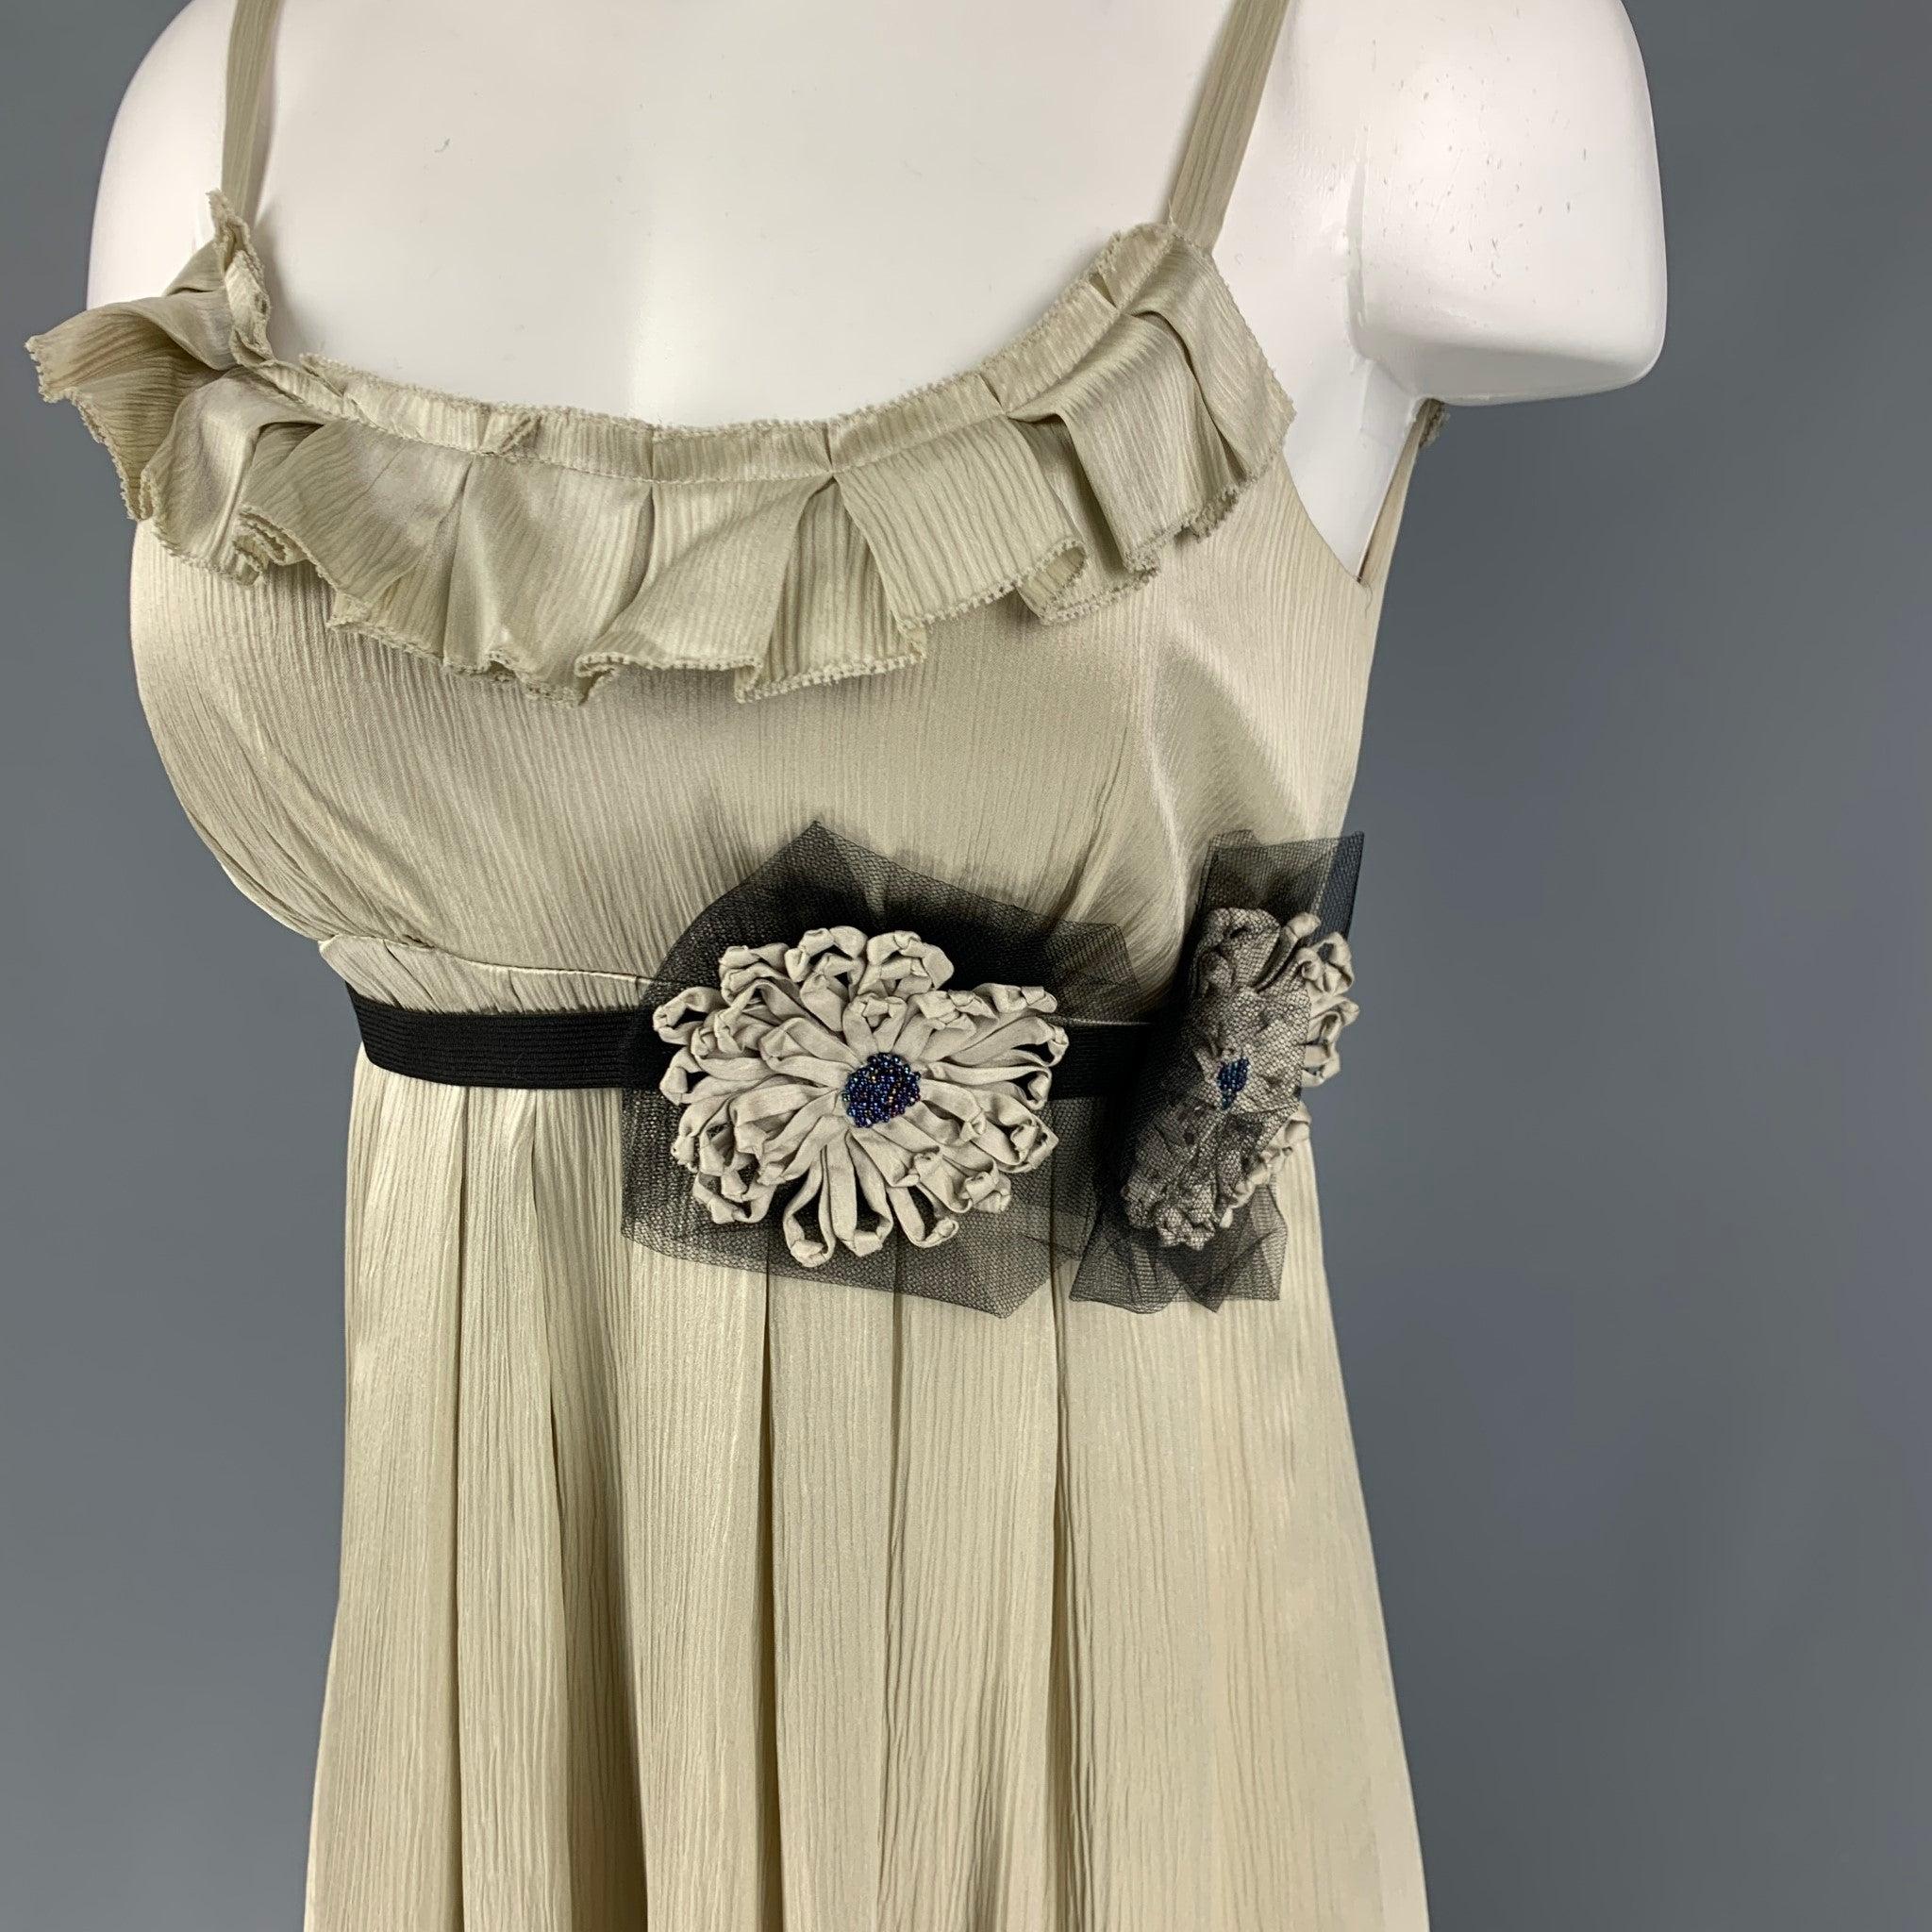 VERA WANG dress comes in a moss ribbed silk featuring an a-line style, spaghetti straps, flower details, removable belt, and a back zip up closure.
Very Good
Pre-Owned Condition. 

Marked:   6 

Measurements: 
  Bust: 26 inches  Waist: 25 inches 